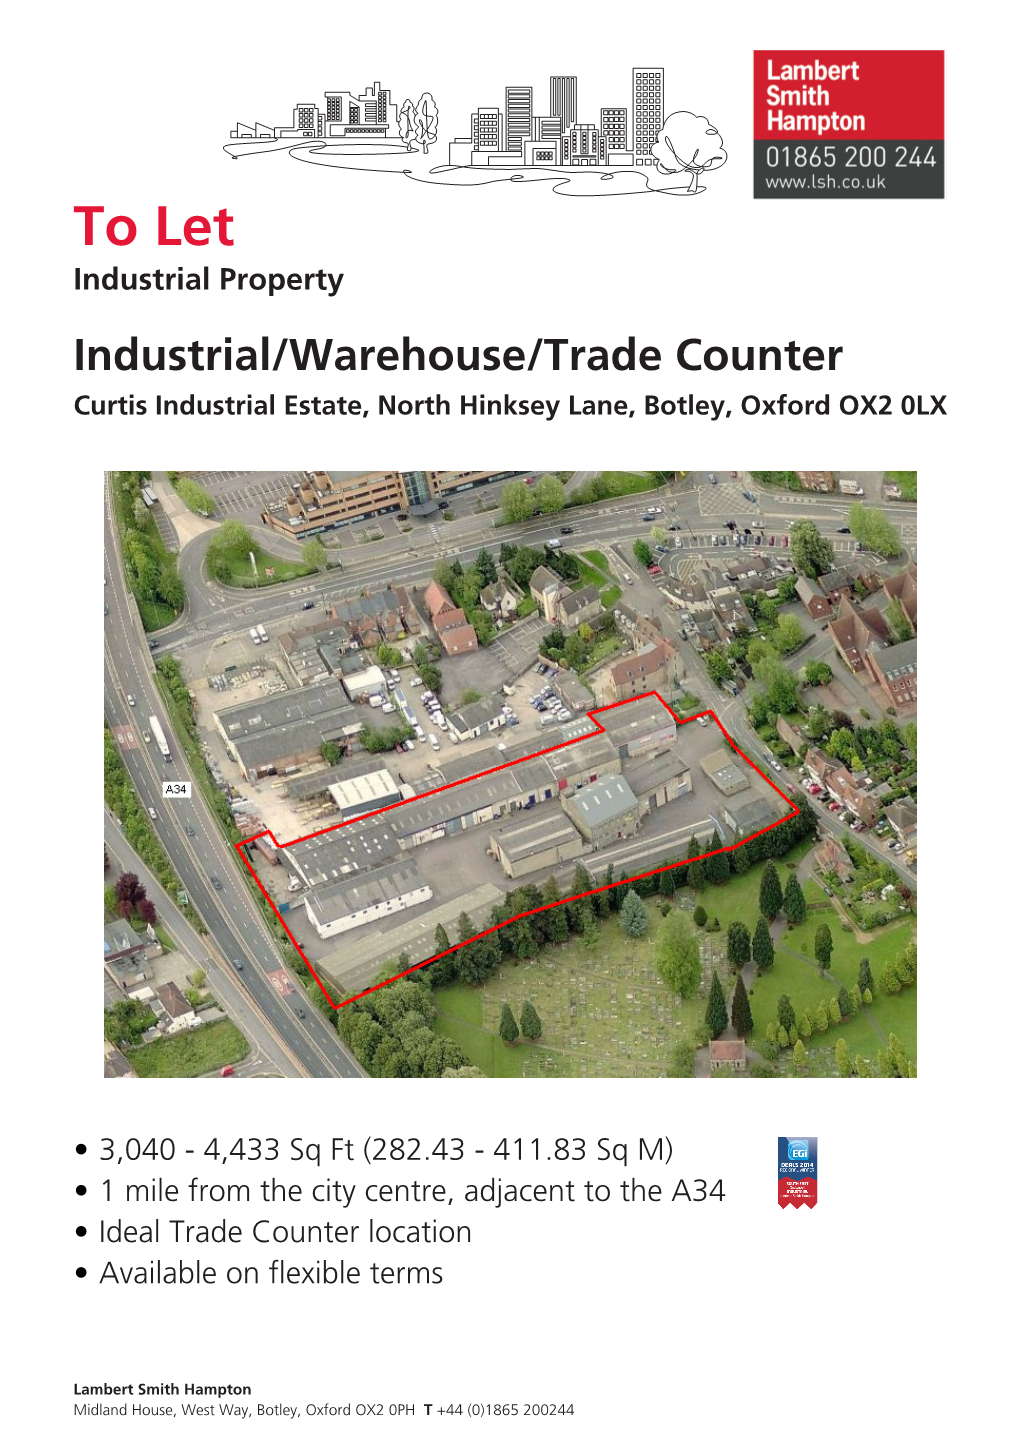 To Let,Curtis Industrial Estate, North Hinksey Lane, Botley, Oxford OX2